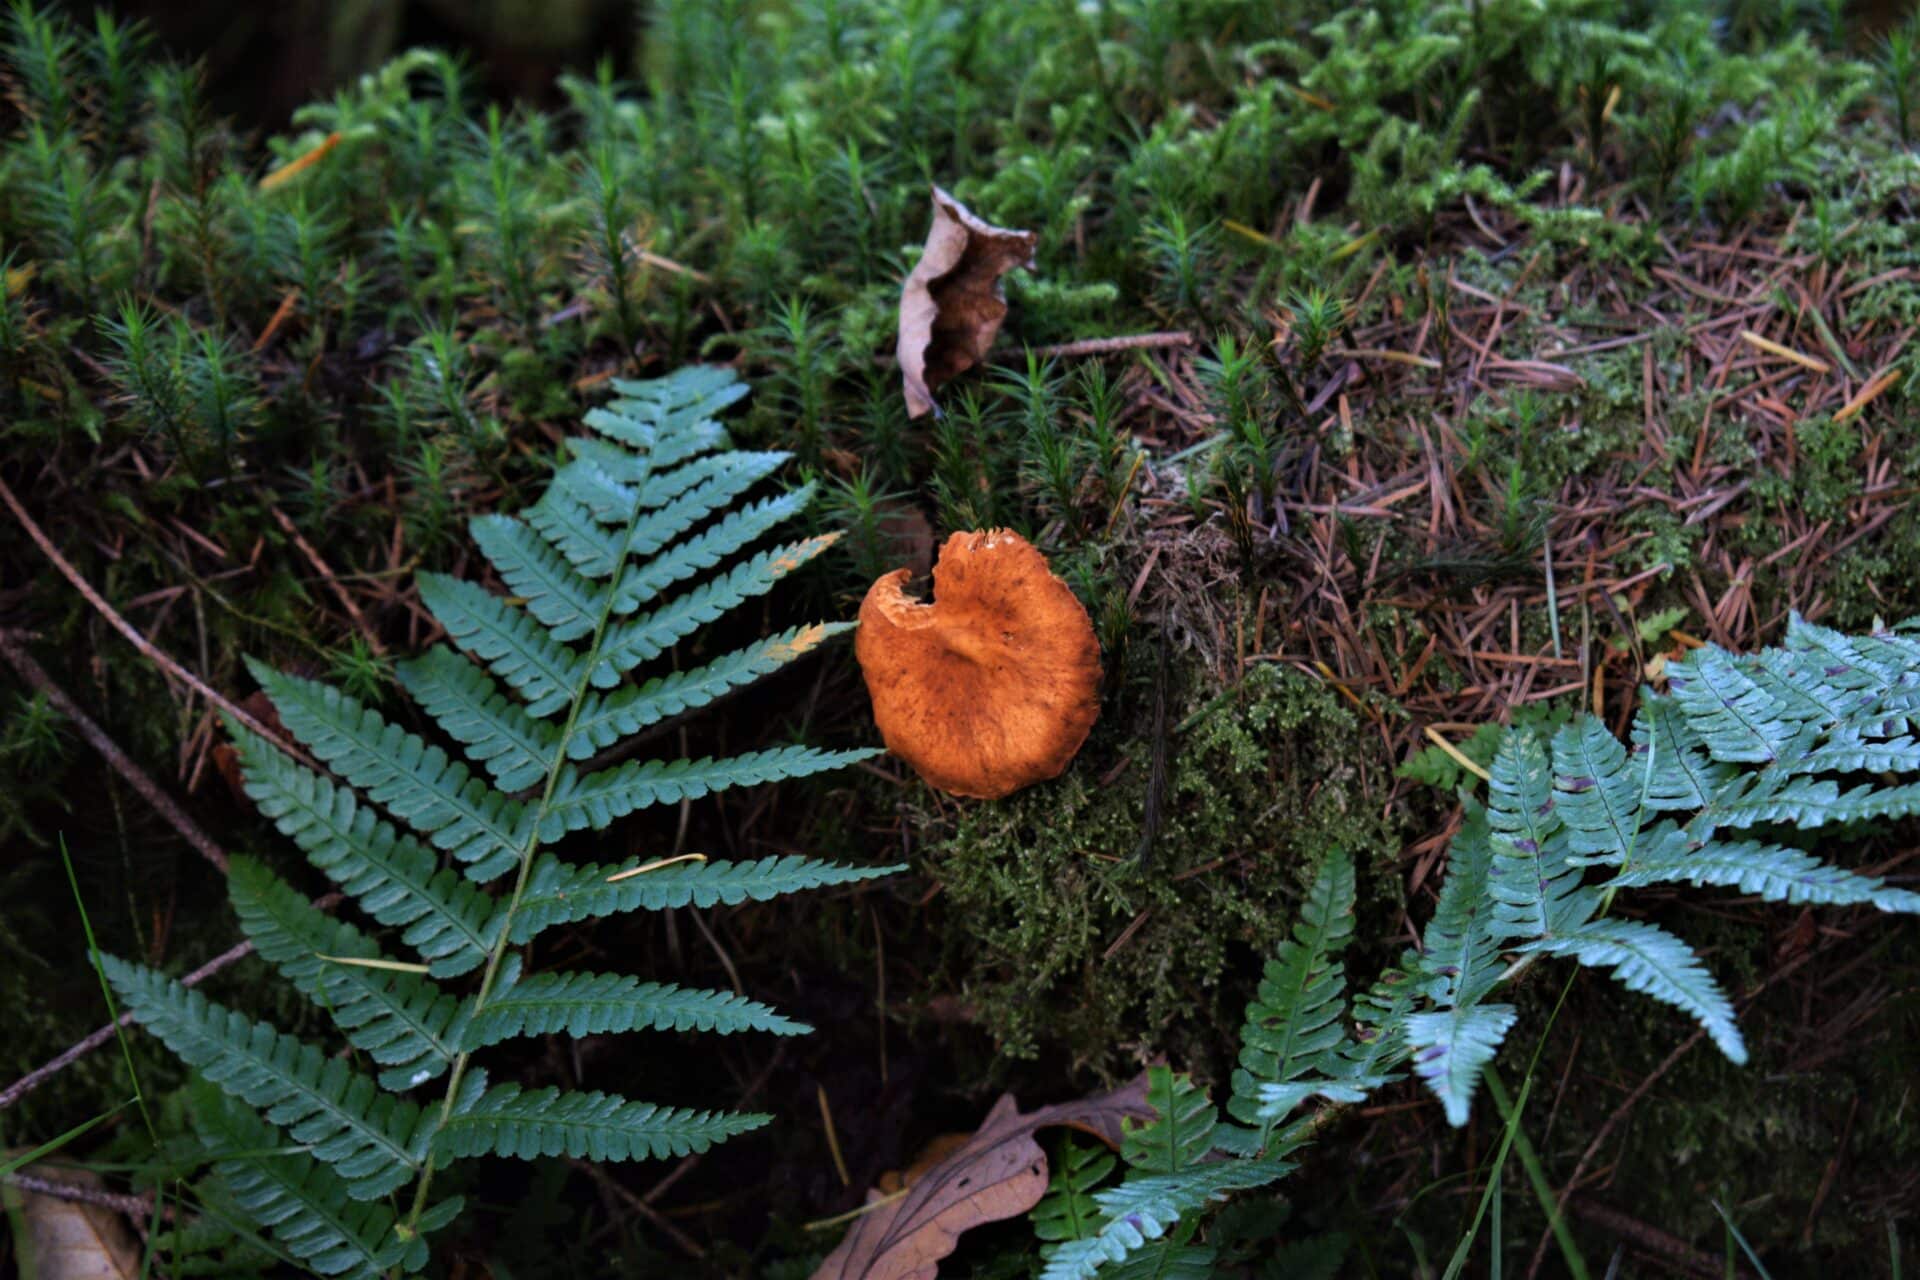 an orange mushroom grows on a moss-covered tree trunk surrounded by fern